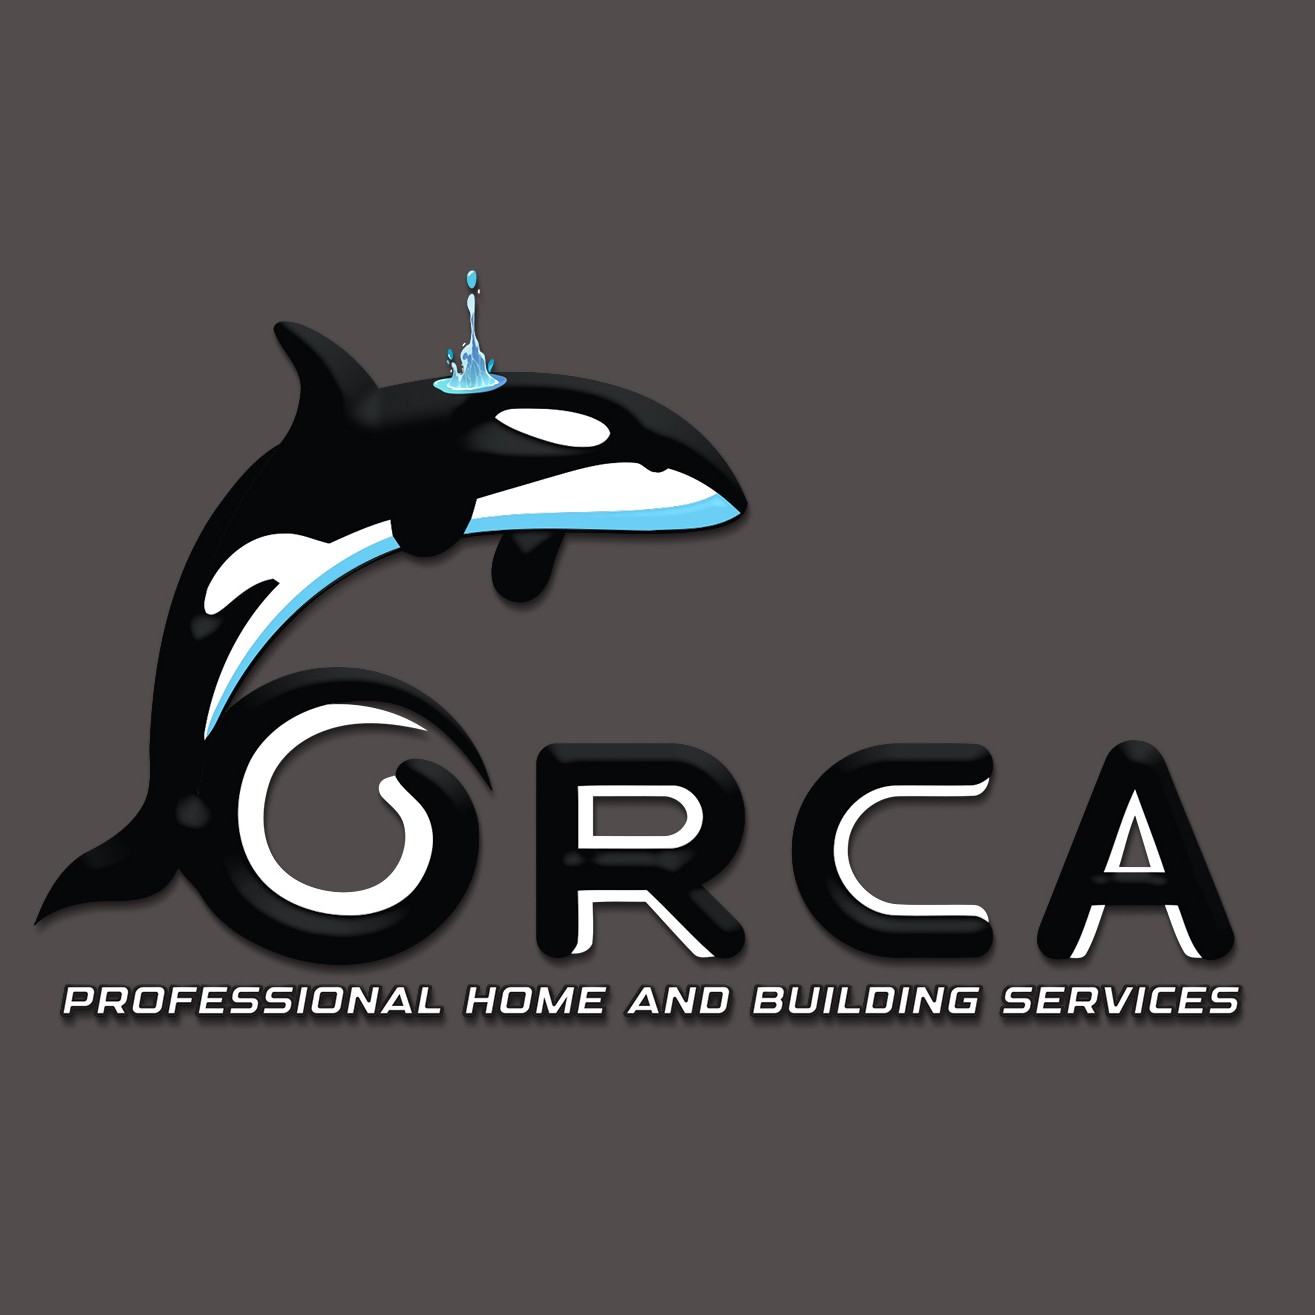 ORCA PROFESSIONAL HOME AND BUILDING SERVICES, LLC Logo